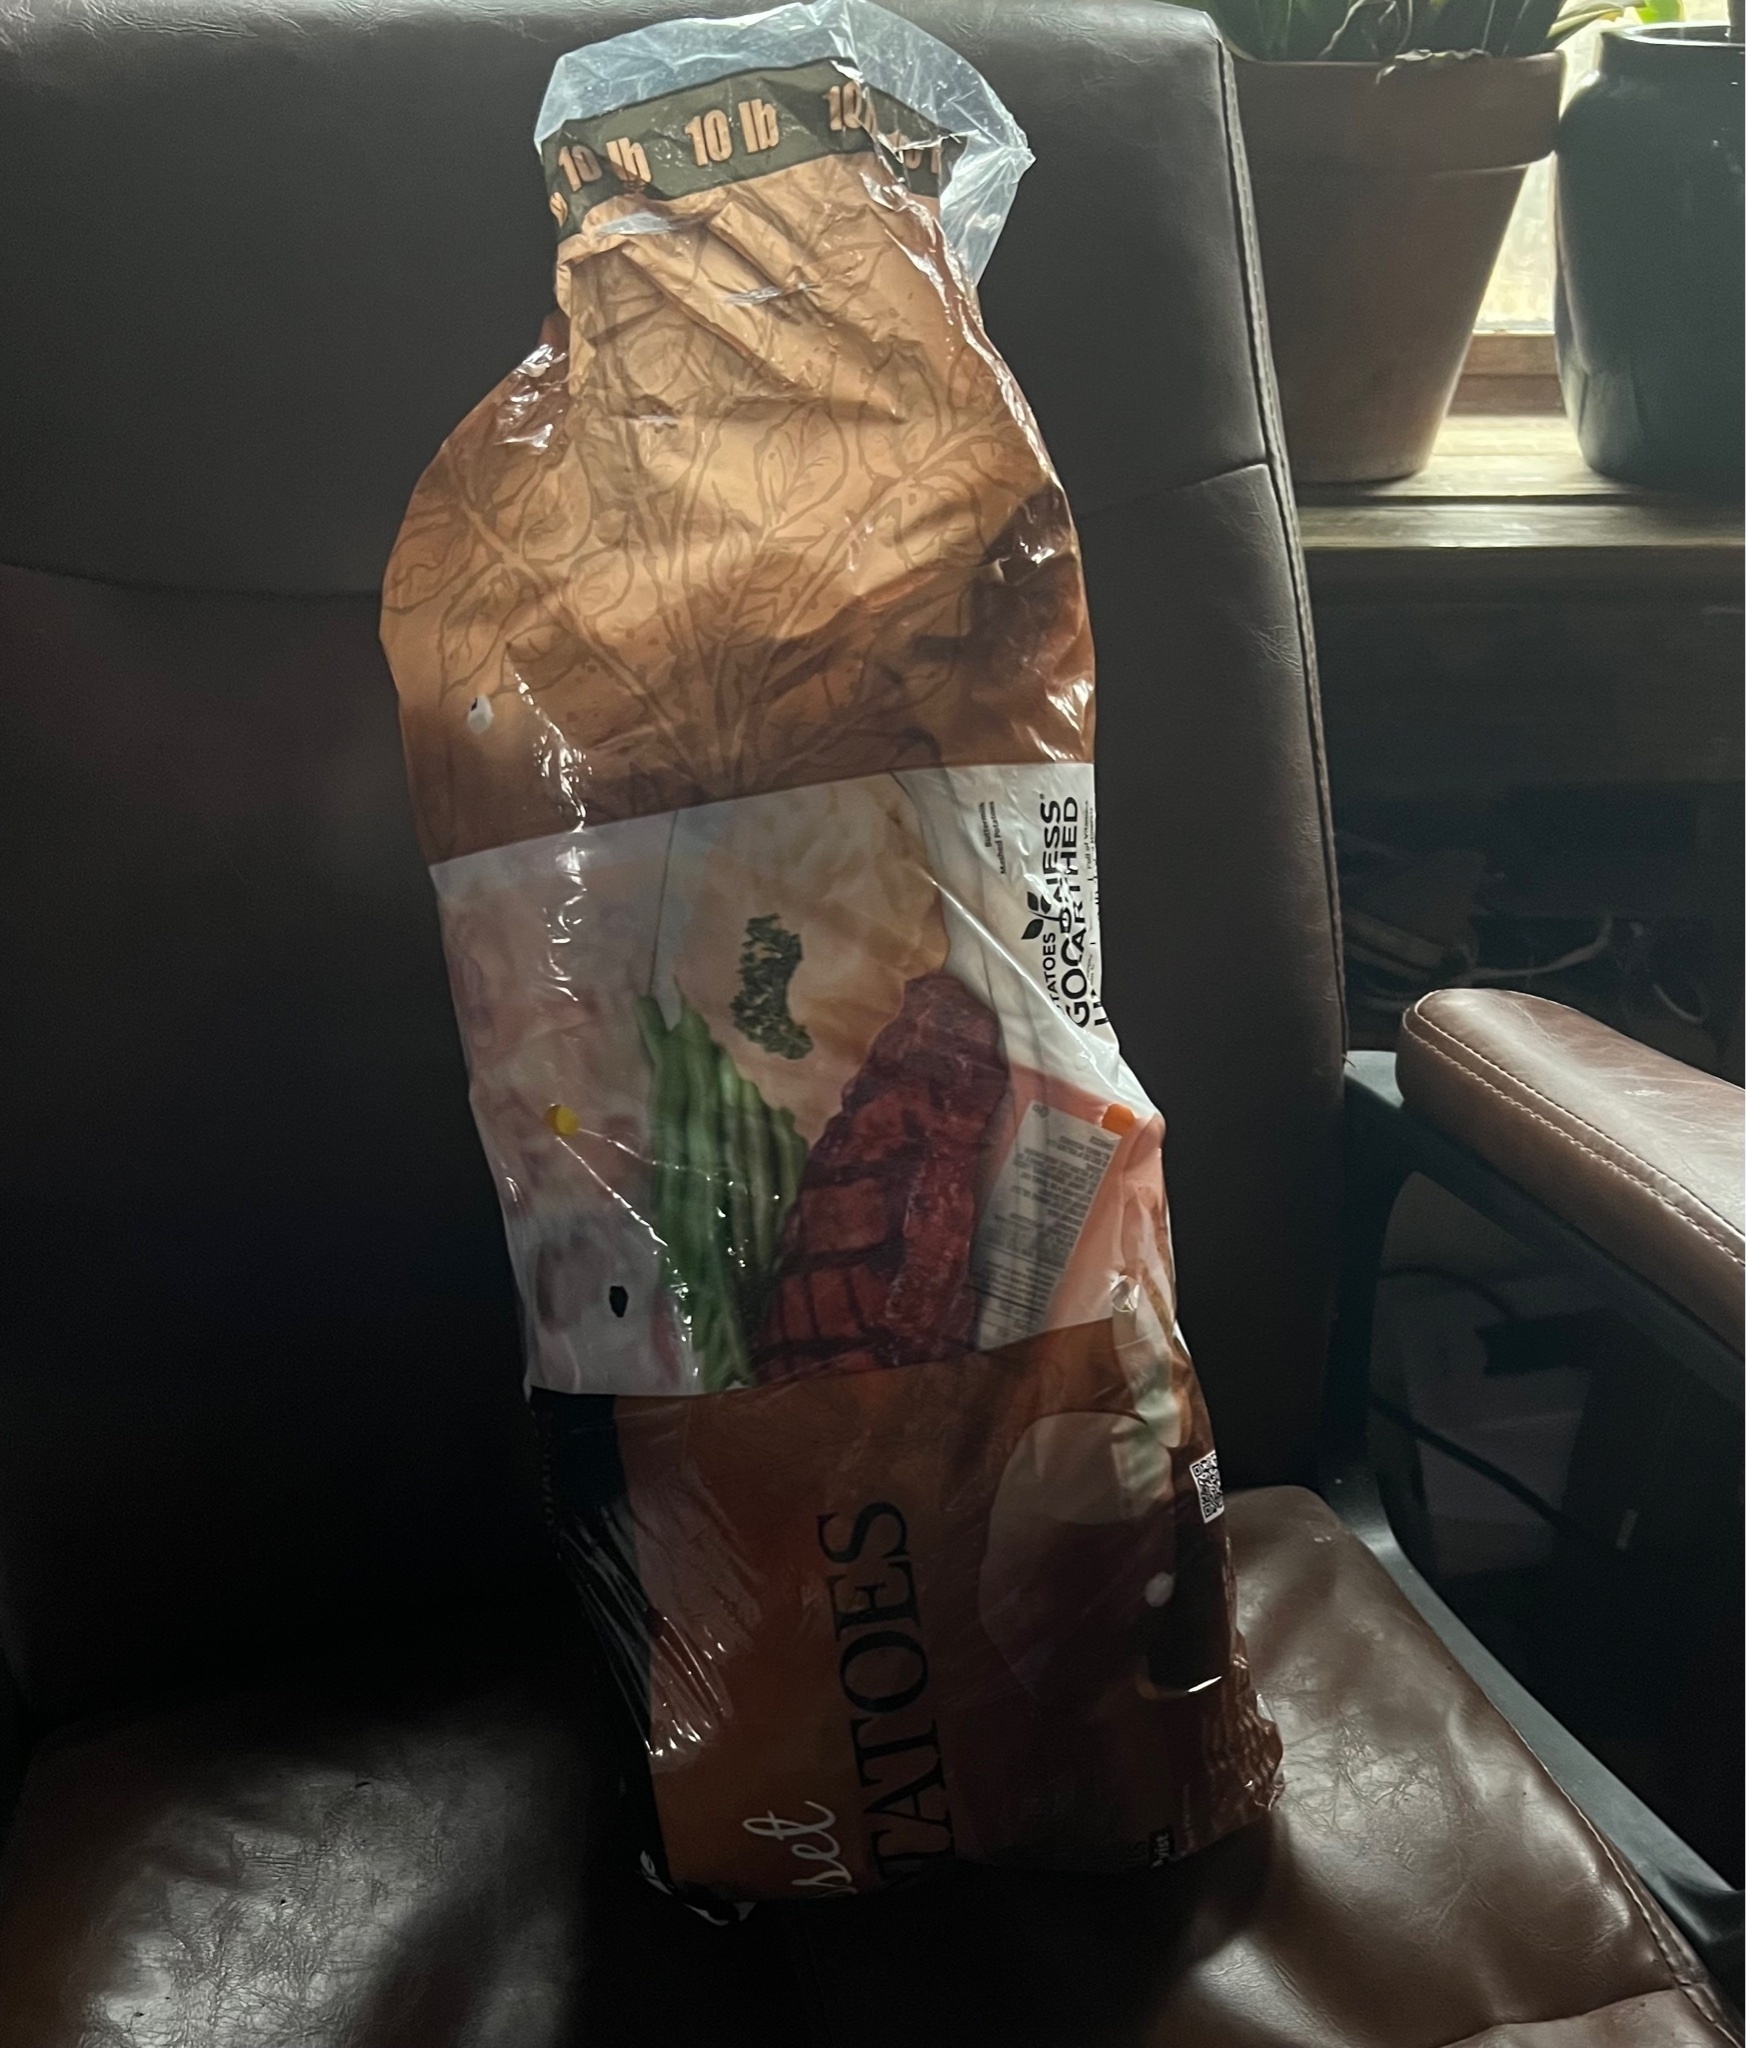 A plastic bag that originally held potatoes is stuffed with 8 weeks worth of waste. The bag sits on a brown chair.